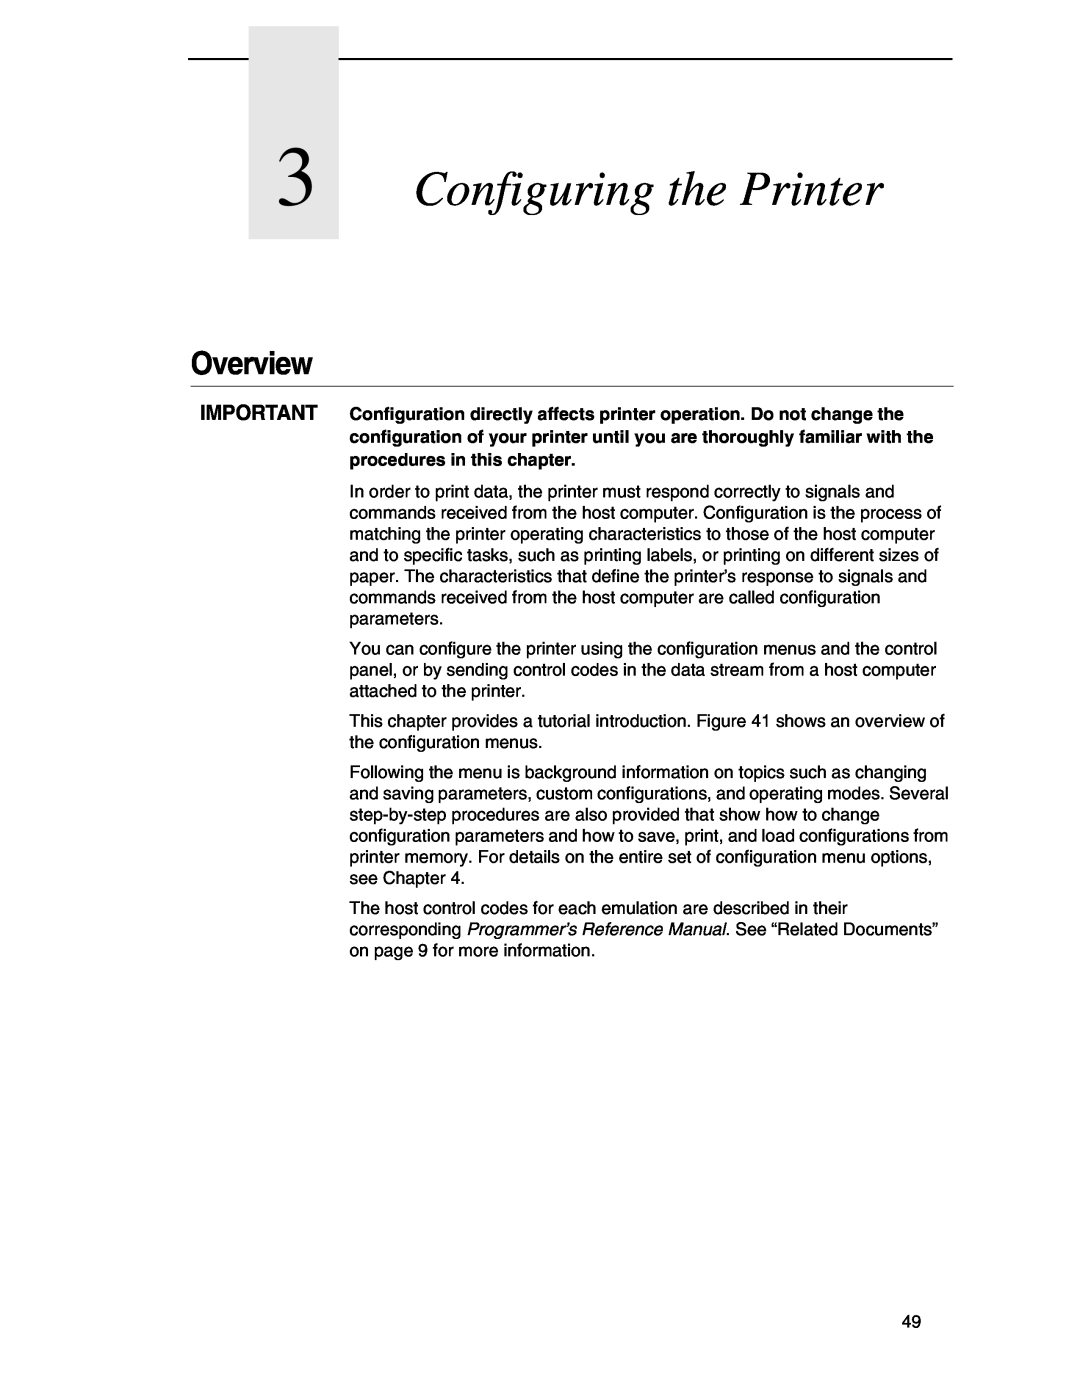 Compaq P5000 Series setup guide Configuring the Printer, Overview 